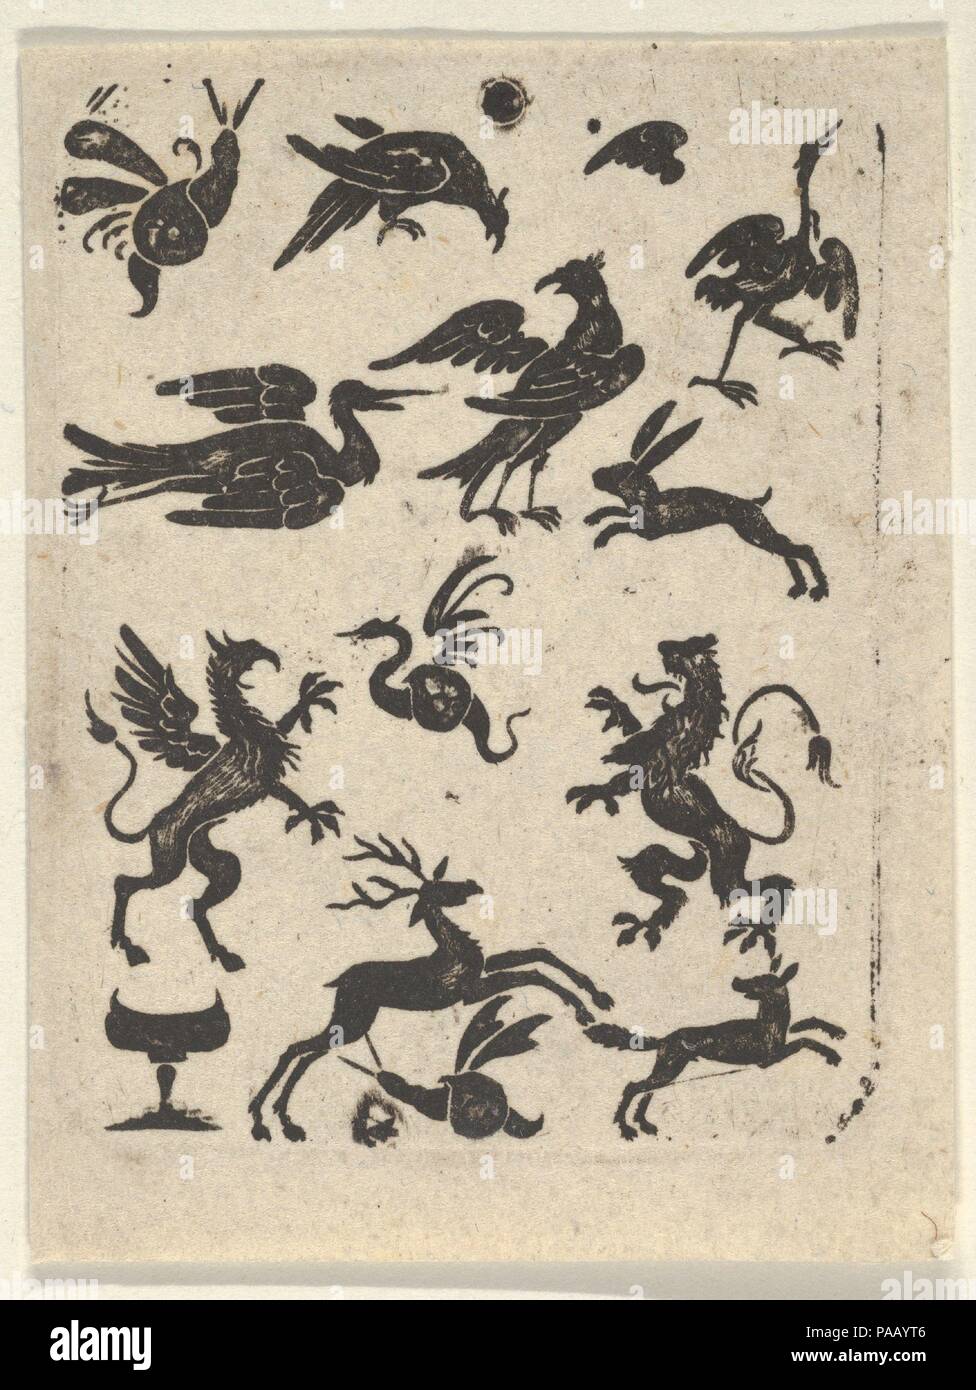 Blackwork Design with Fifteen Motifs. Artist: attributed to Jonas Bentzen (ca. 1592-1616). Dimensions: Sheet: 2 3/8 × 1 3/4 in. (6 × 4.5 cm). Date: ca. 1592-1616.  Blackwork print with fifteen small motifs for goldsmiths work. The motifs are small animals or mythical creatures, including griffins and winged snails, as well as a goblet at the bottom left. Museum: Metropolitan Museum of Art, New York, USA. Stock Photo